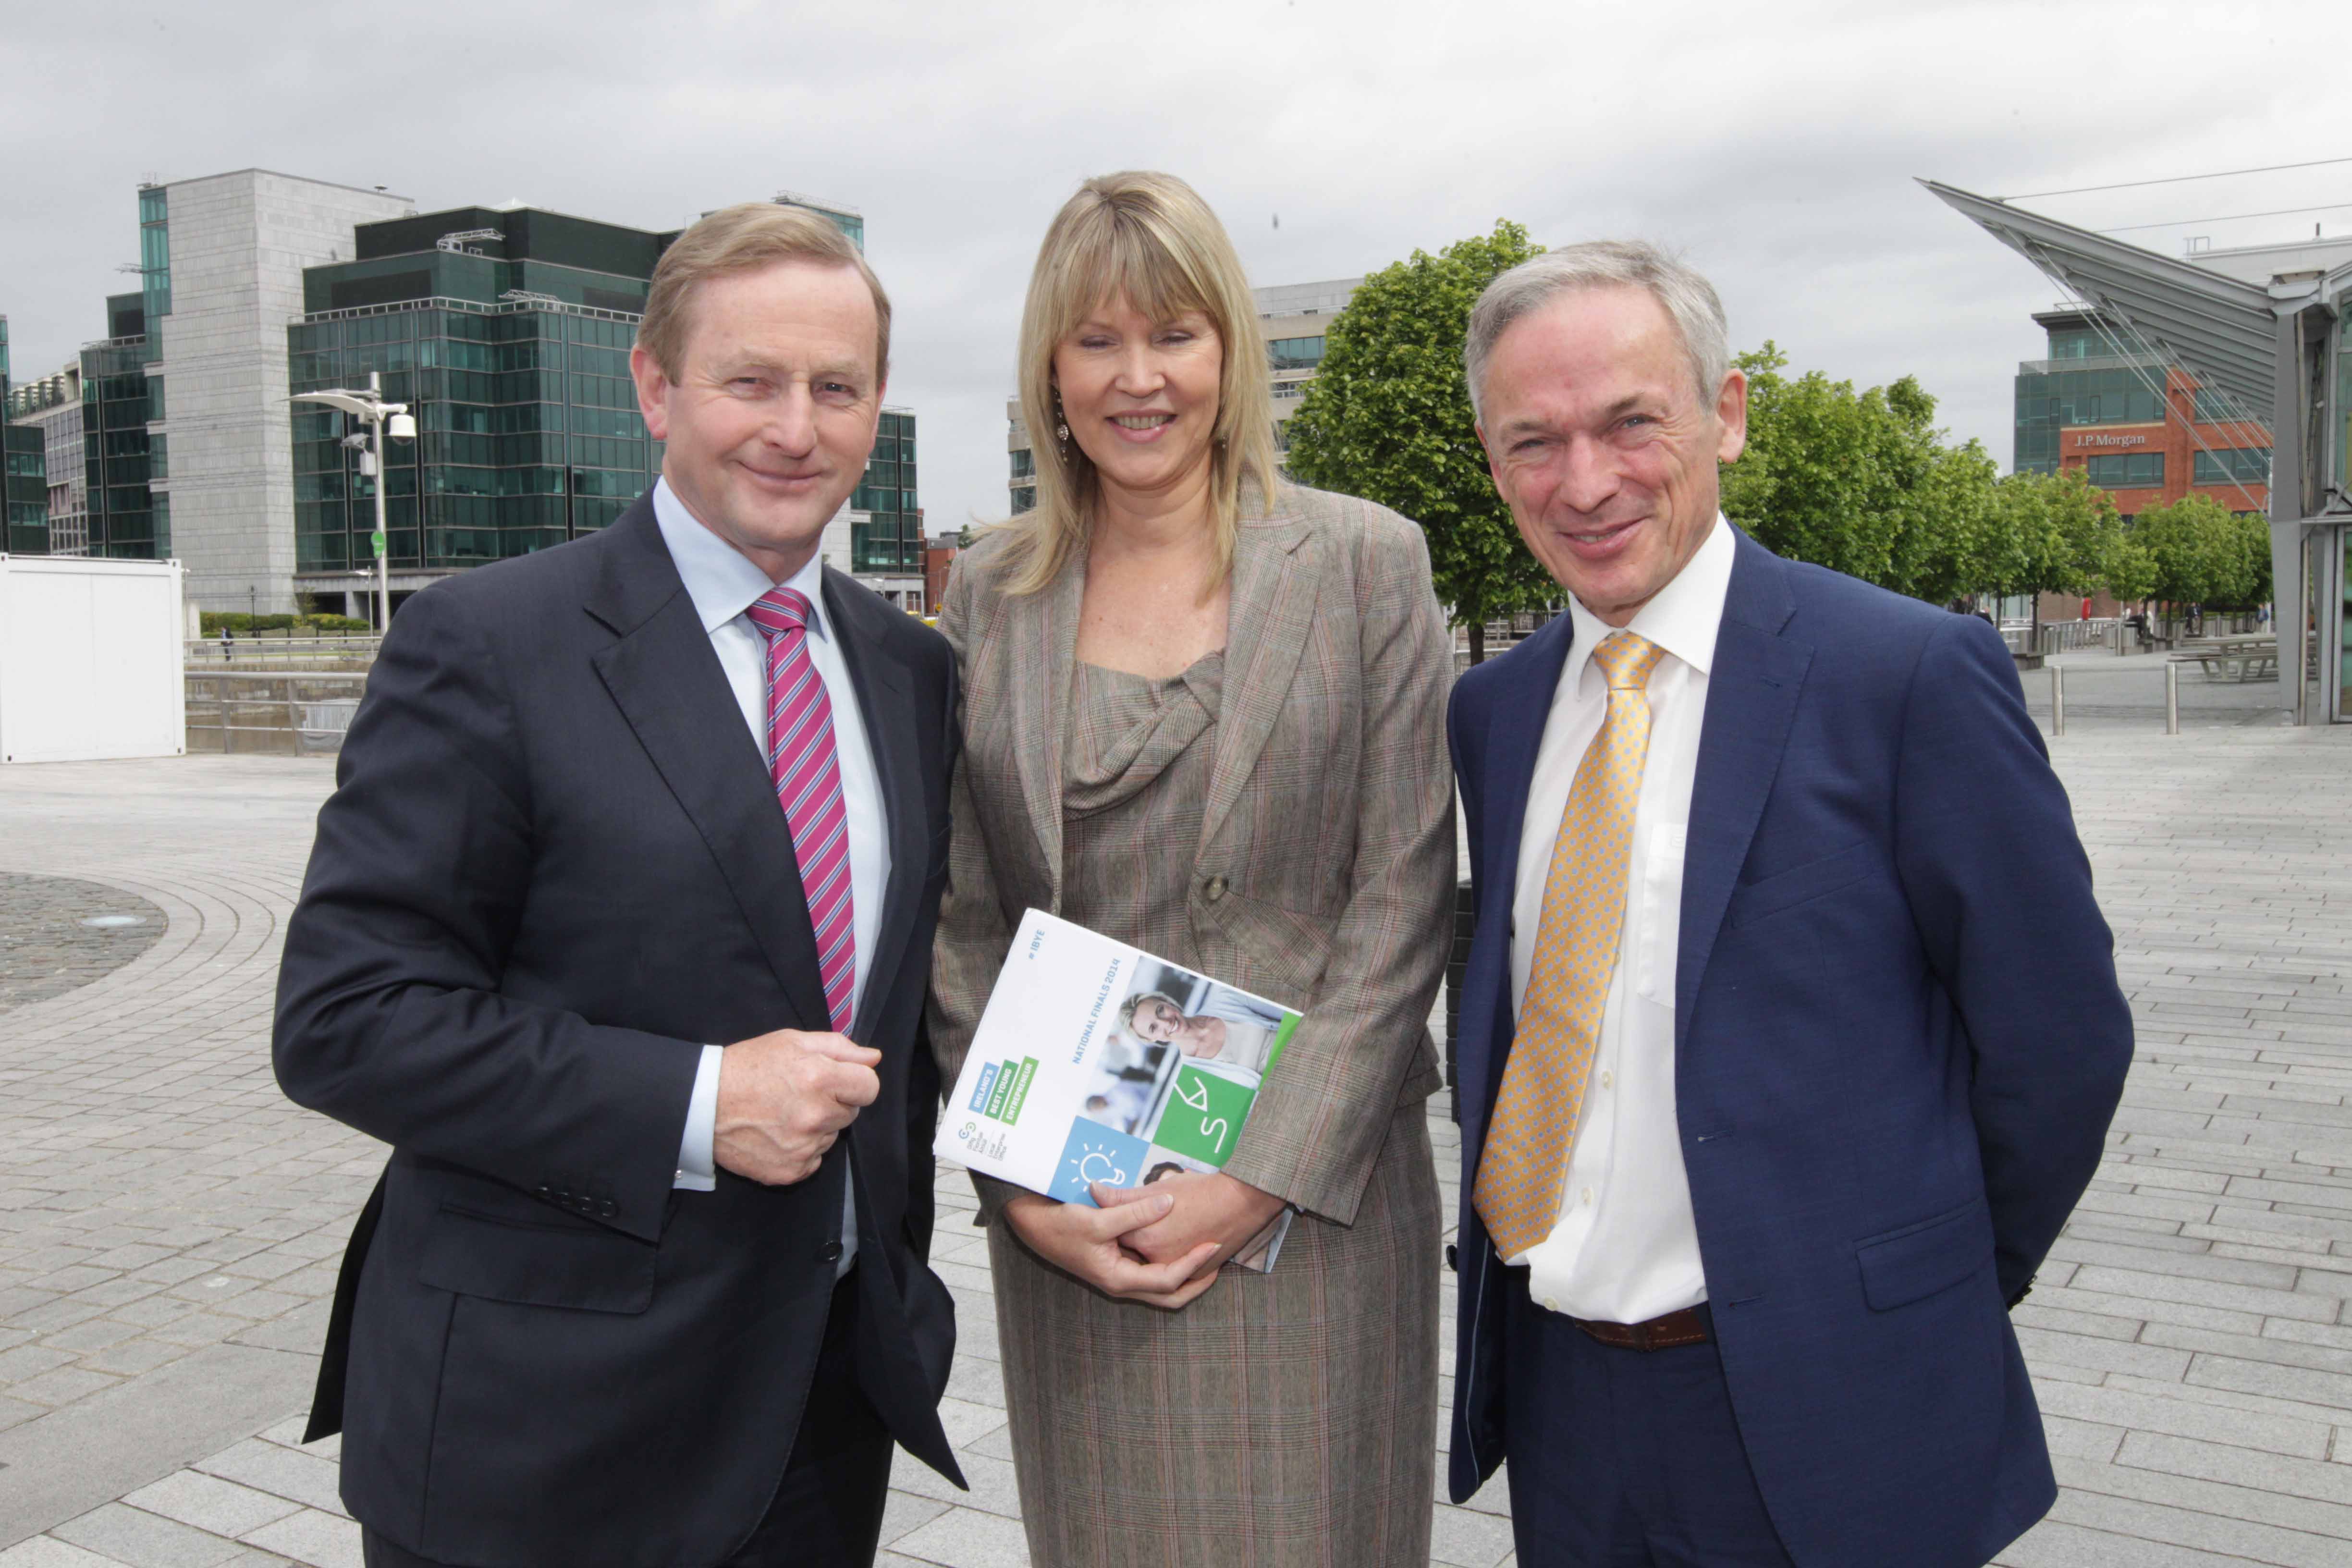 An Taoiseach Enda Kenny TD and Minister Richard Bruton with Sheelagh Daly Wicklow LEO at launch of IBYE 2015